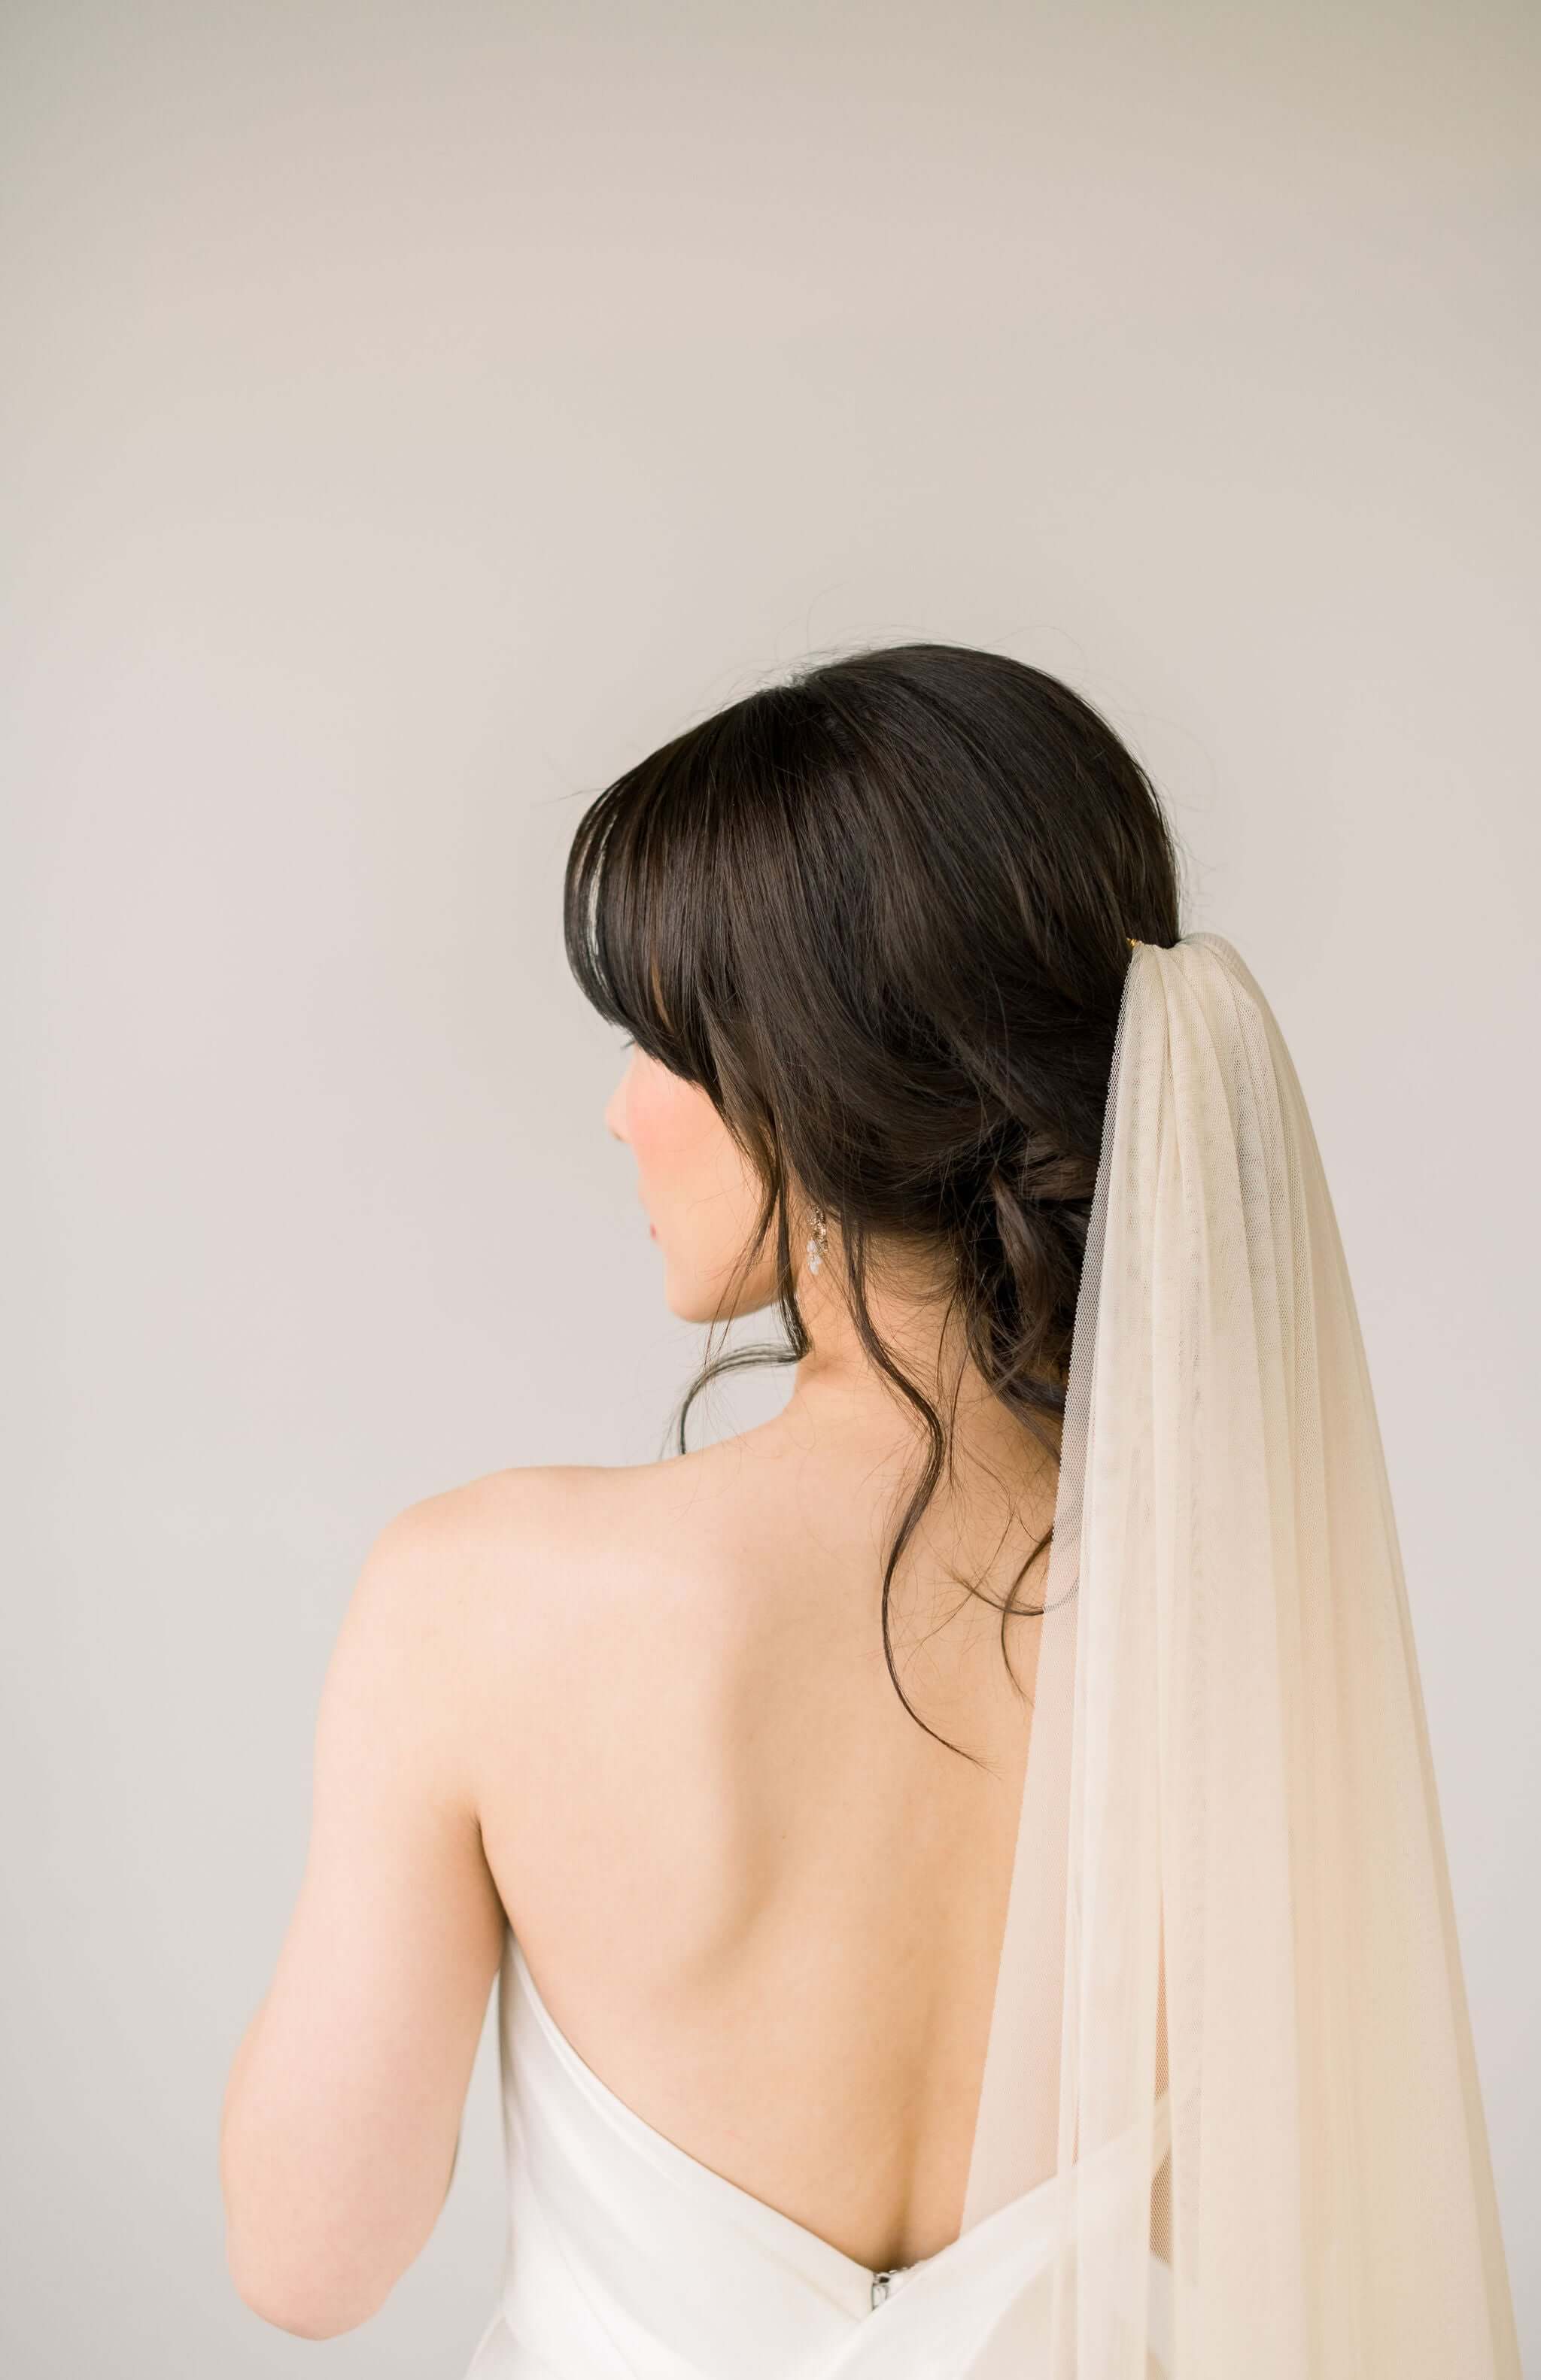 Tips from a Stylist: All About Veils